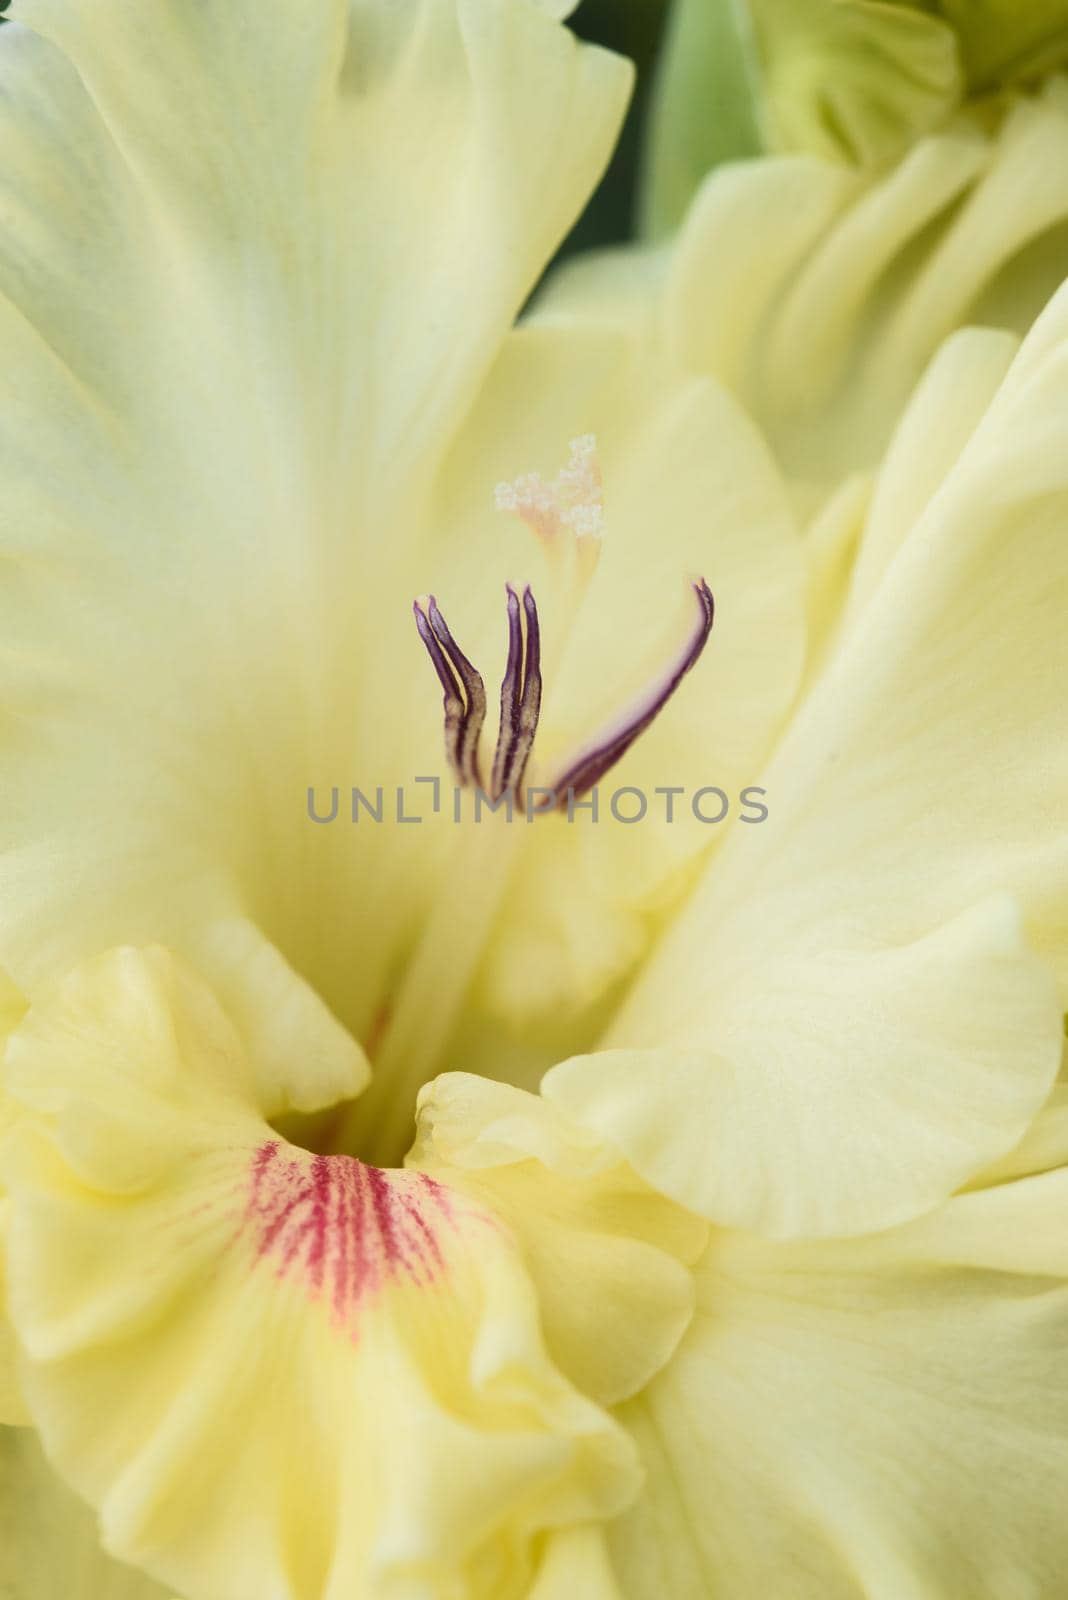 Extreme close-up of the gladiolus inflorescence with pistils and stamens in detail and very close.